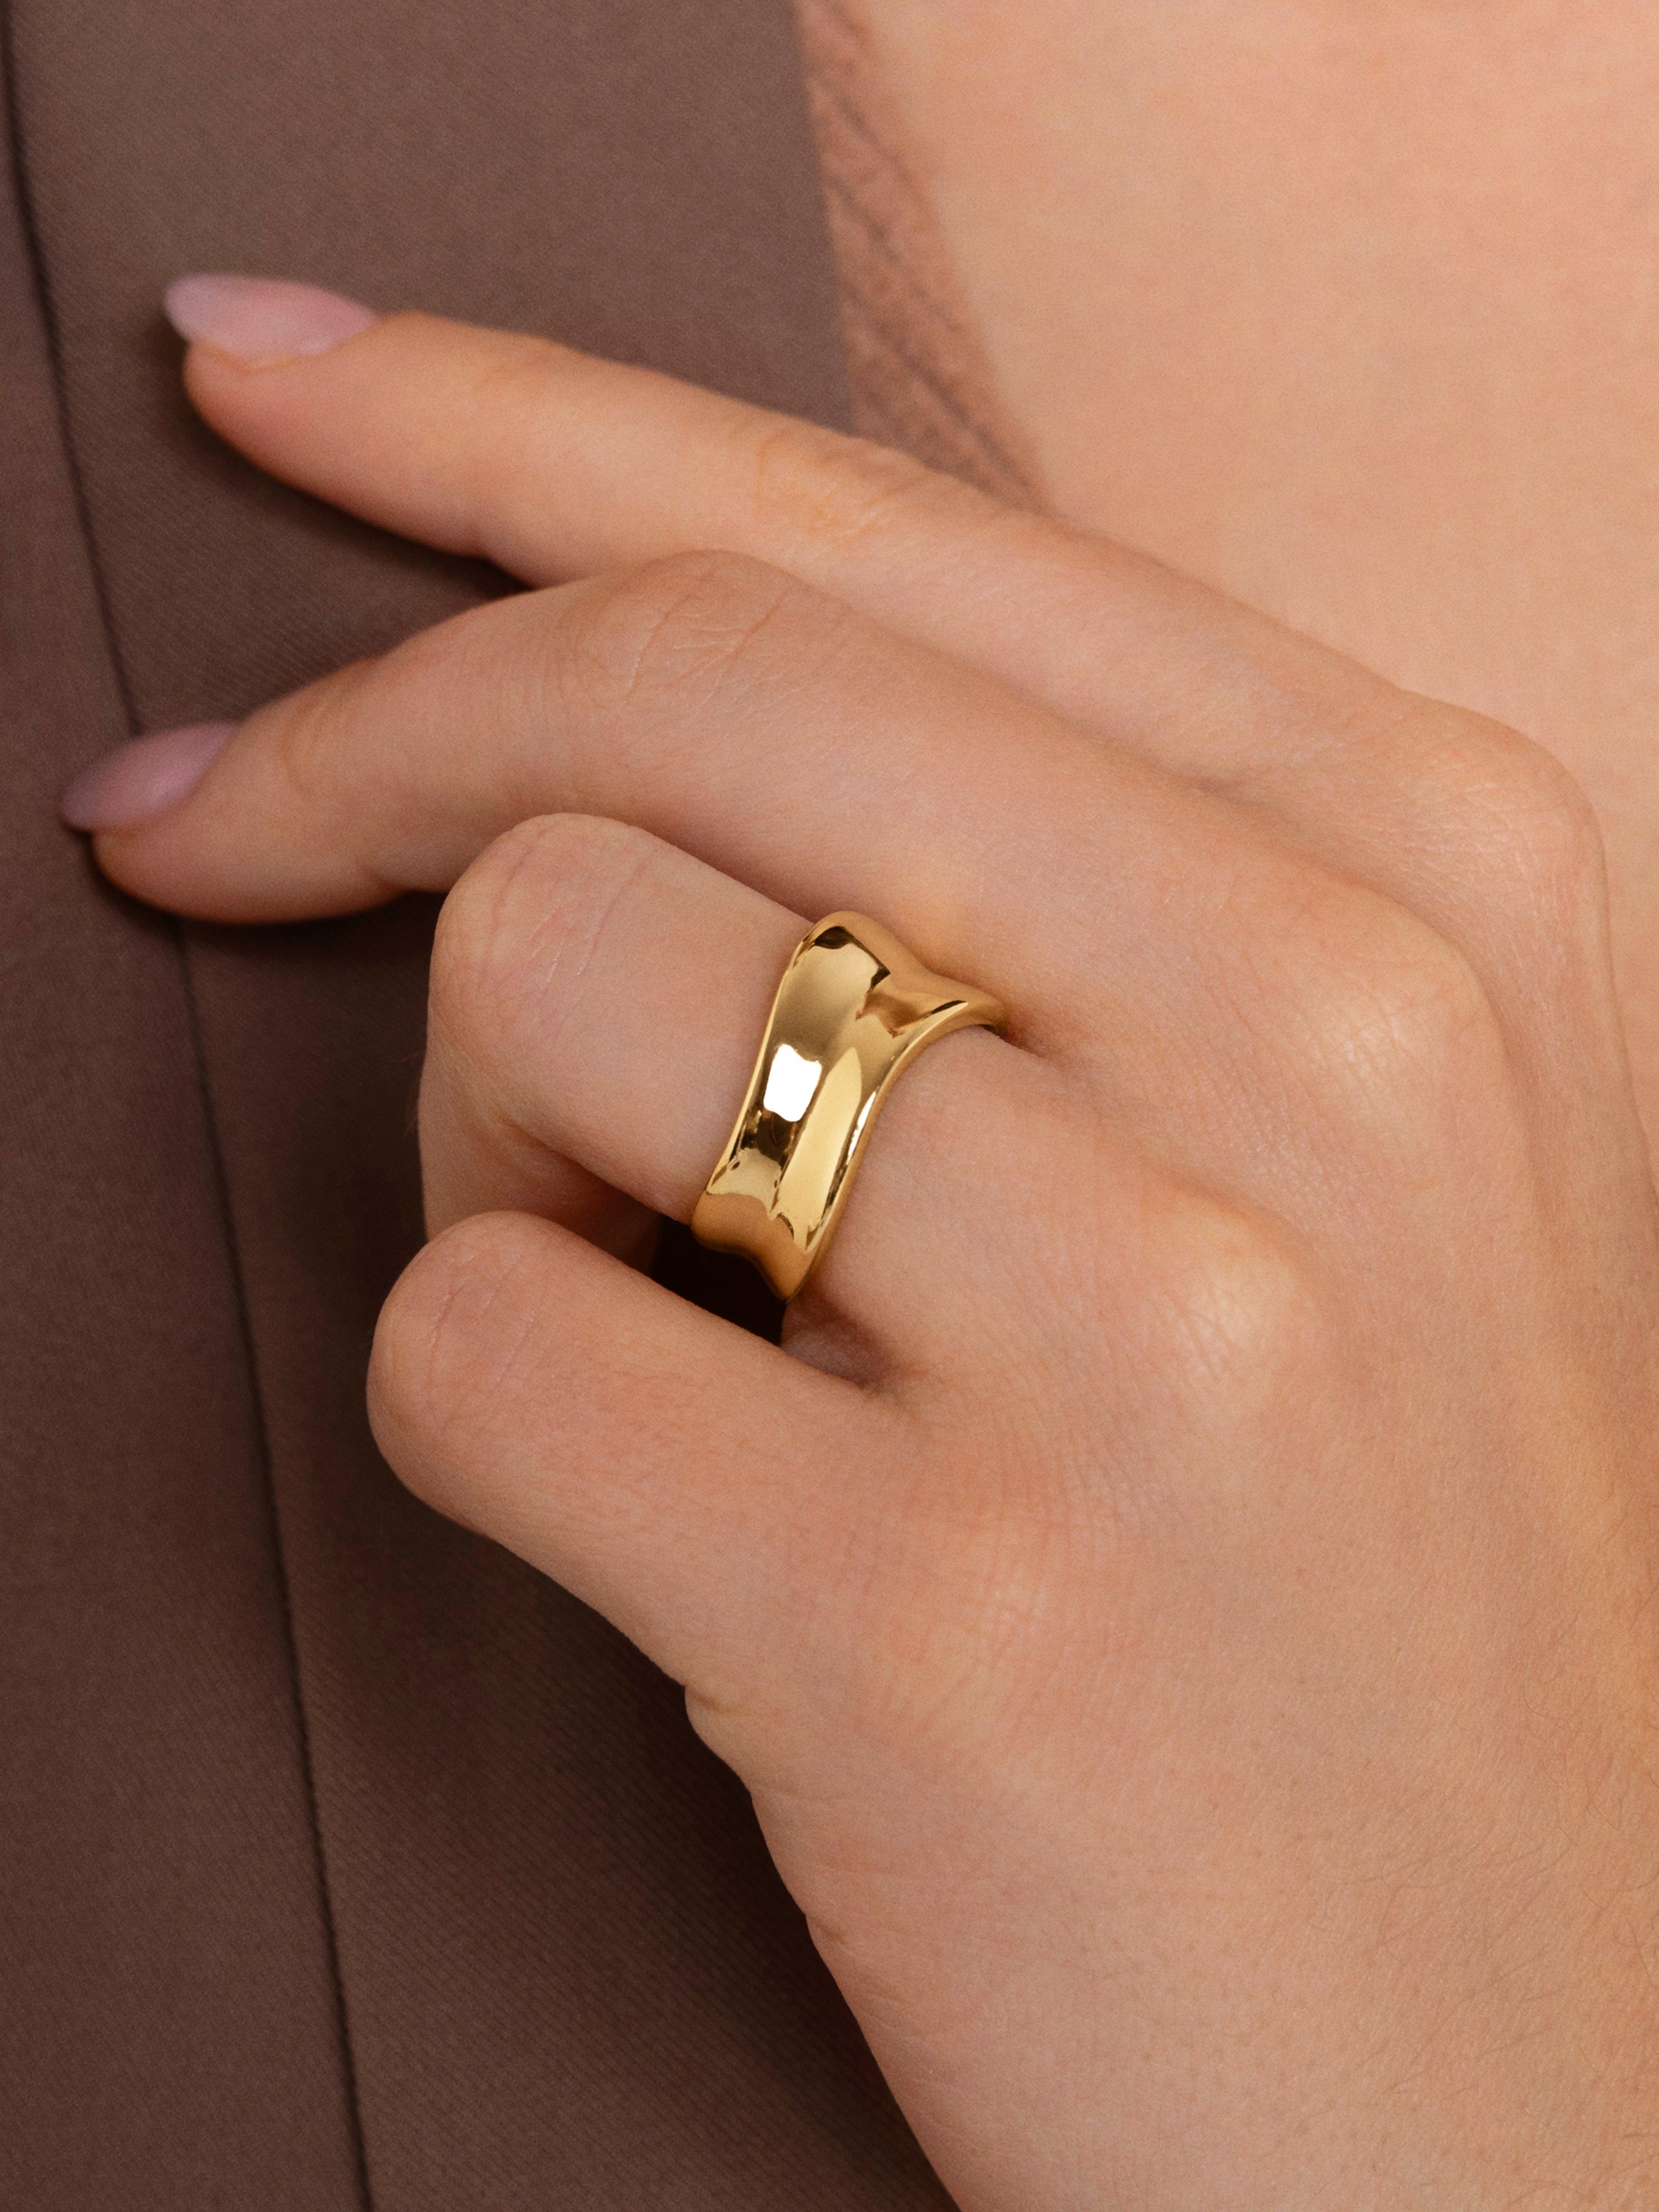 Aire Gold Ring 